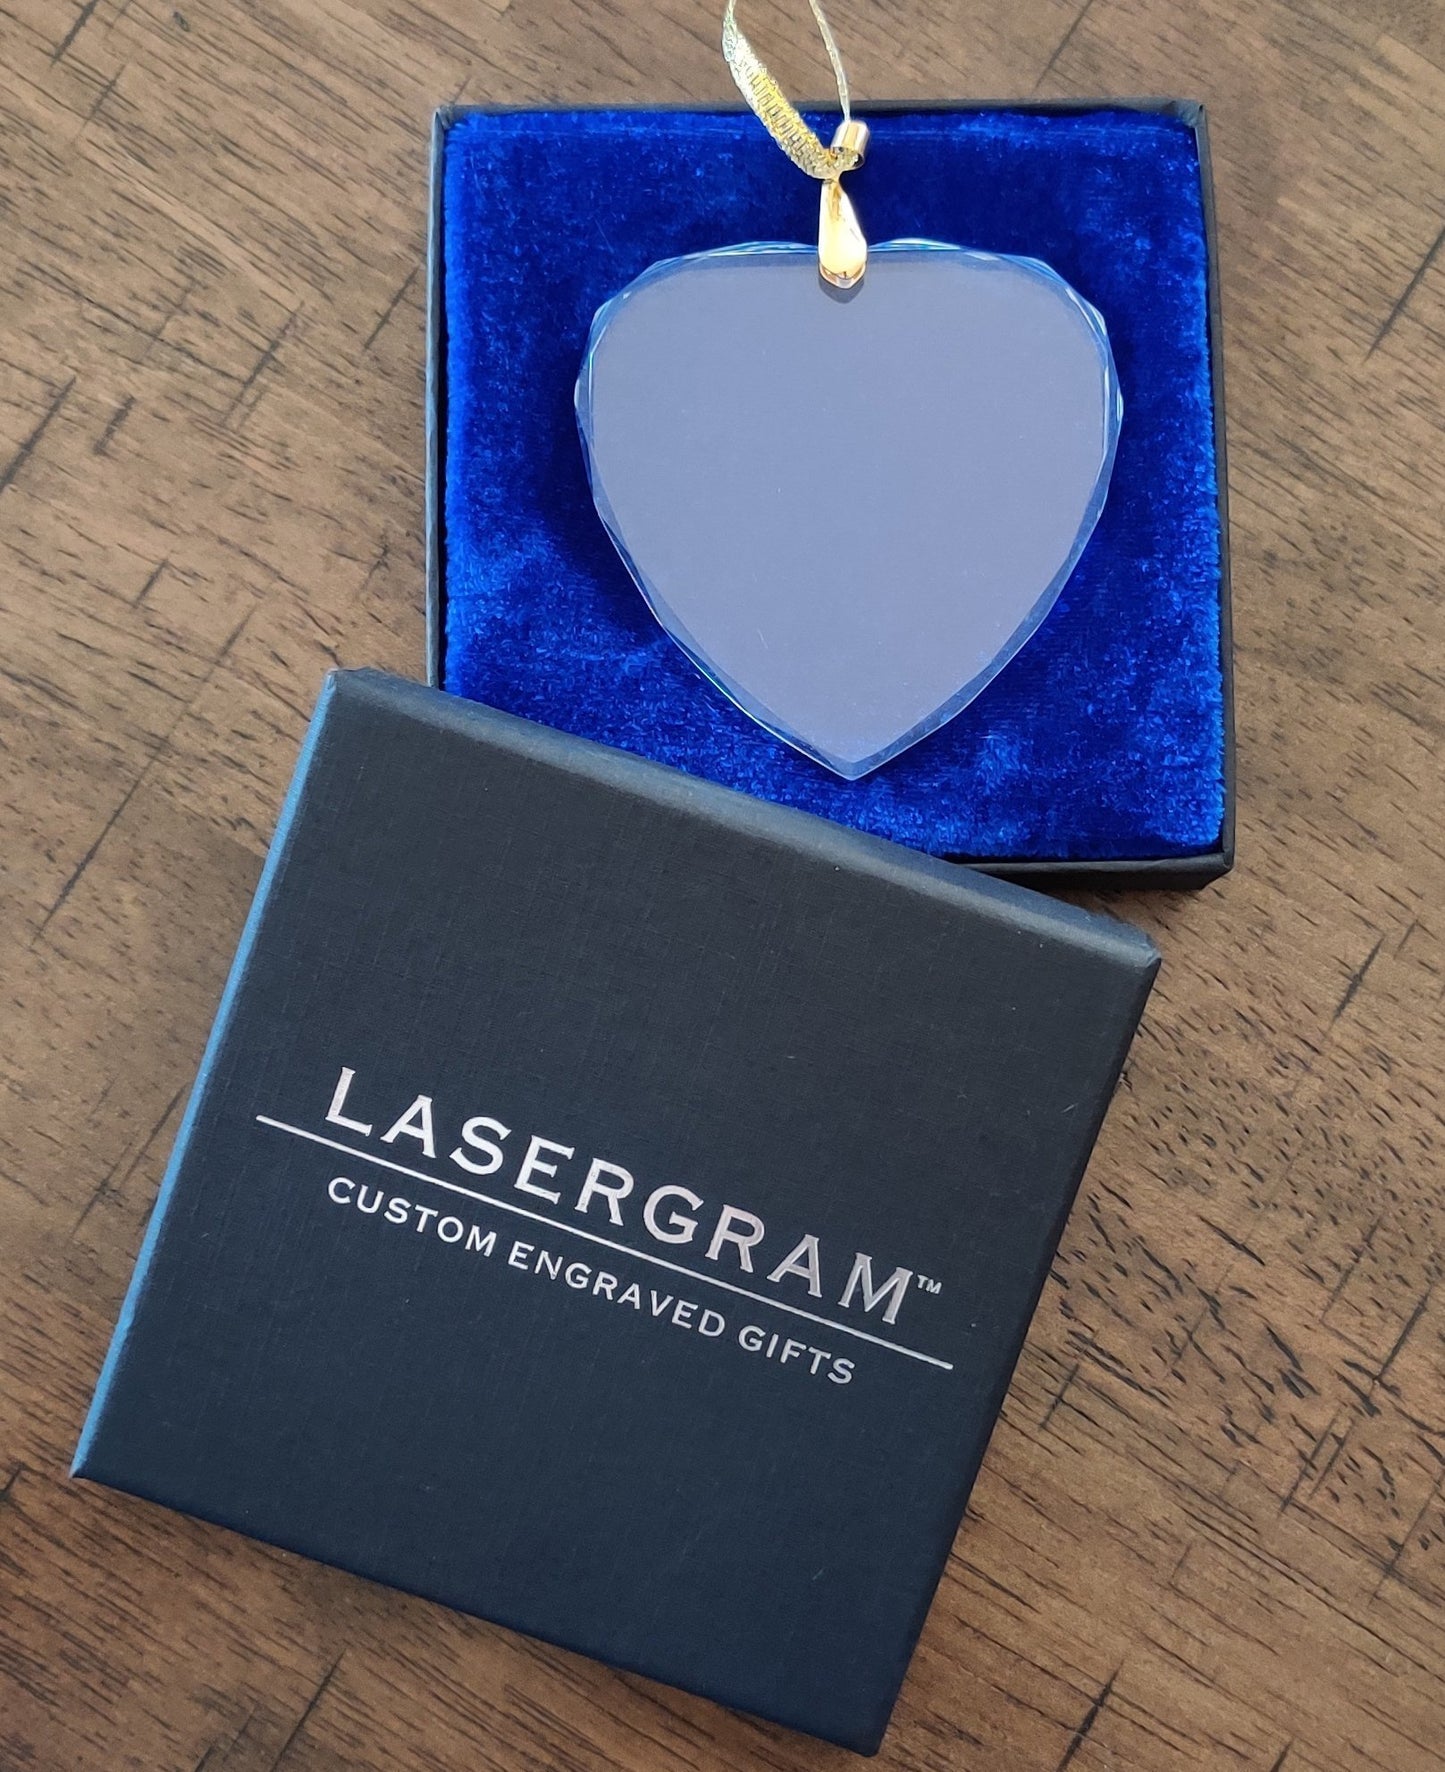 LaserGram Christmas Ornament, Diva, Personalized Engraving Included (Heart Shape)